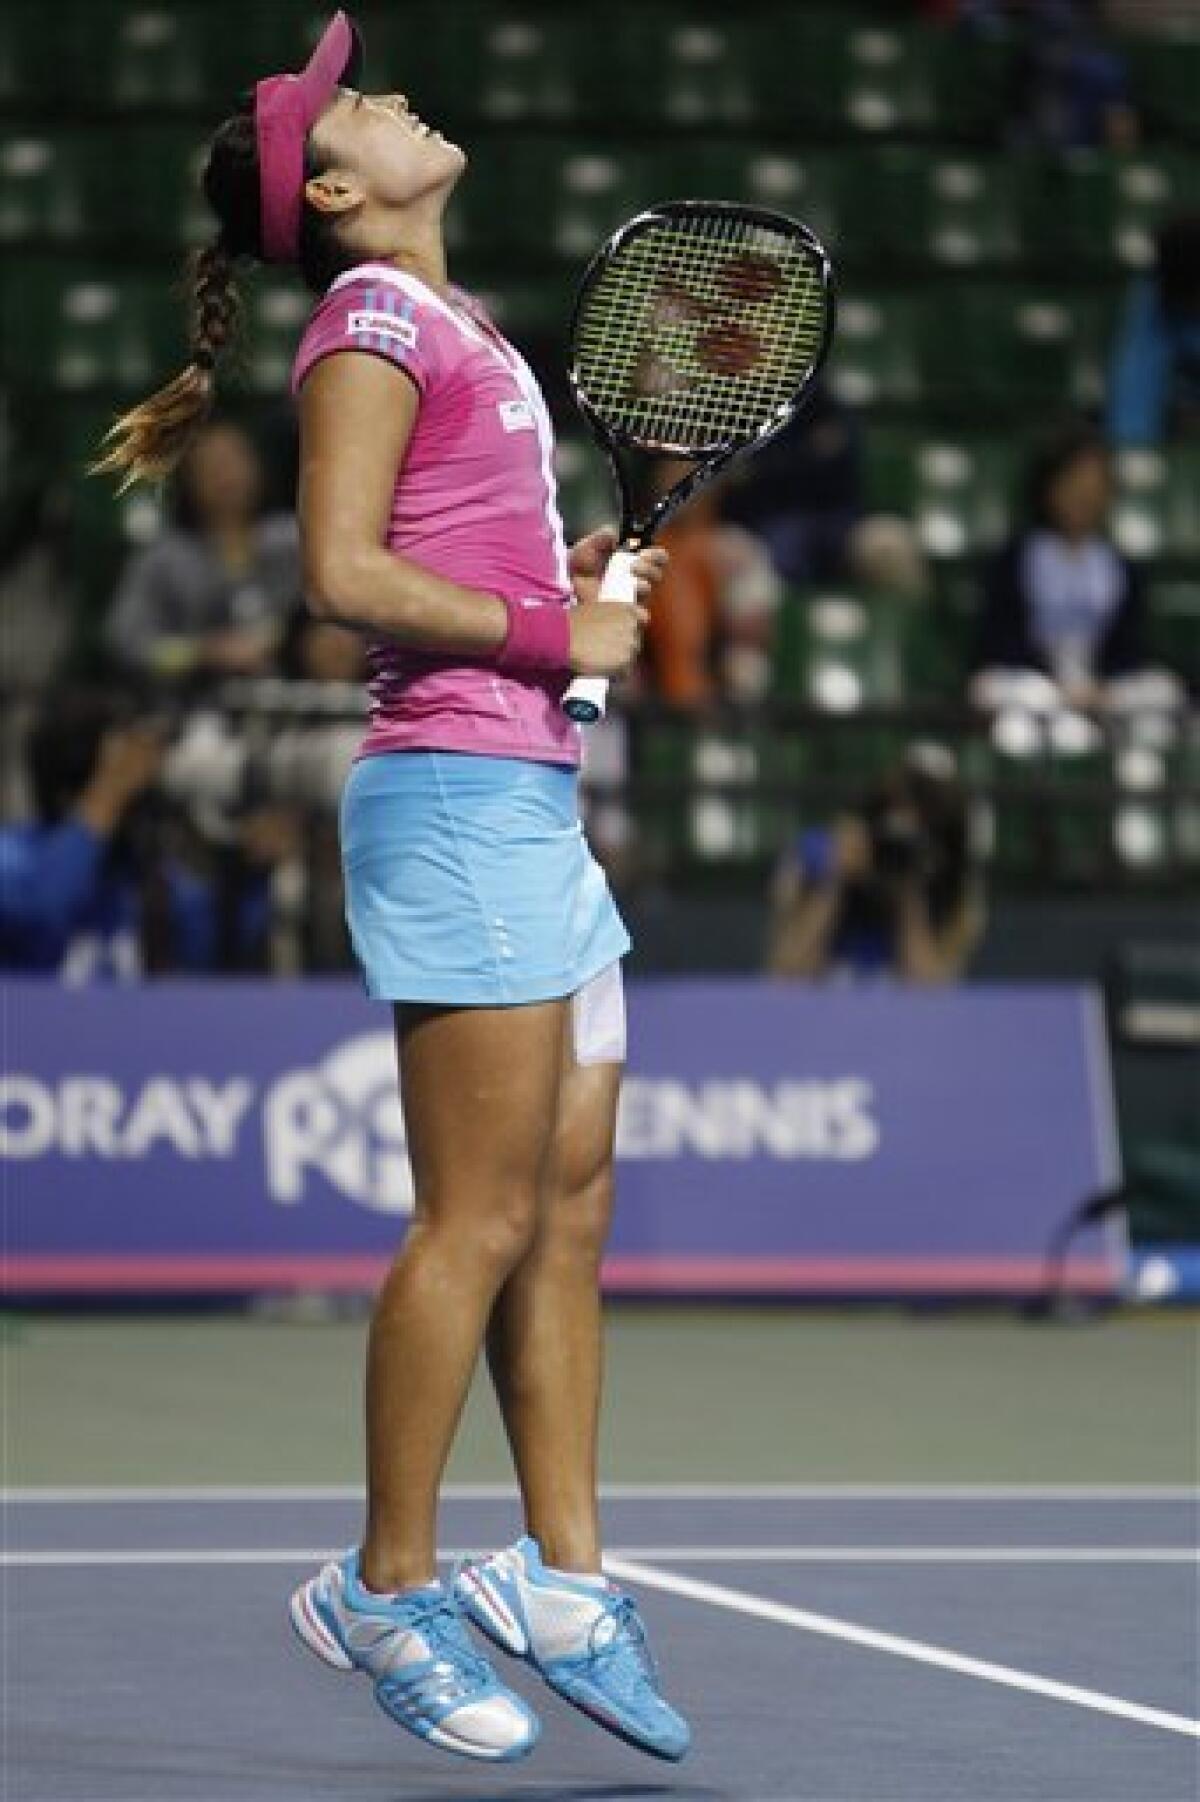 Ayumi Morita of Japan reacts after losing a point against Marion Bartoli of France during their second round match of during the Japan Pan Pacific Open tennis tournament in Tokyo, Monday, Sept. 26, 2011. Bartoli won 6-3, 0-6, 6-3. (AP Photo/Shizuo Kambayashi)